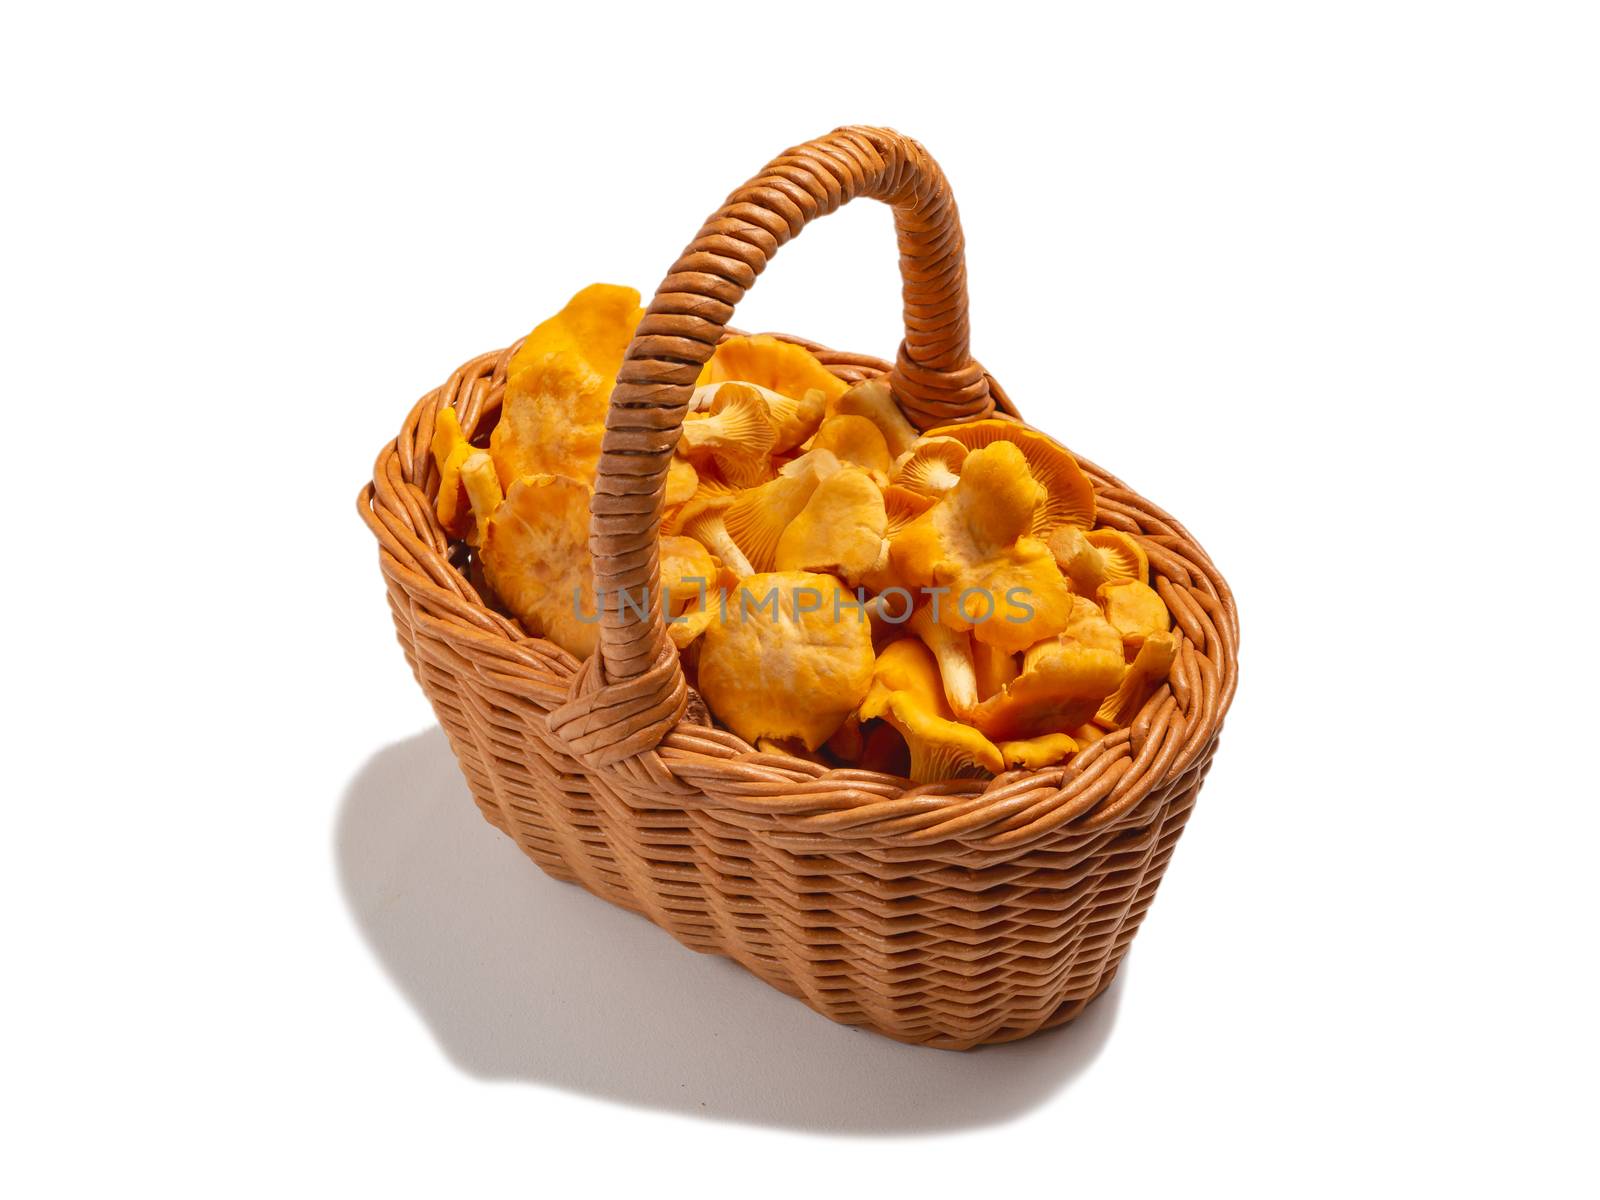 Group of edible forest chanterelle mushrooms in wicker basket isolated on white background.